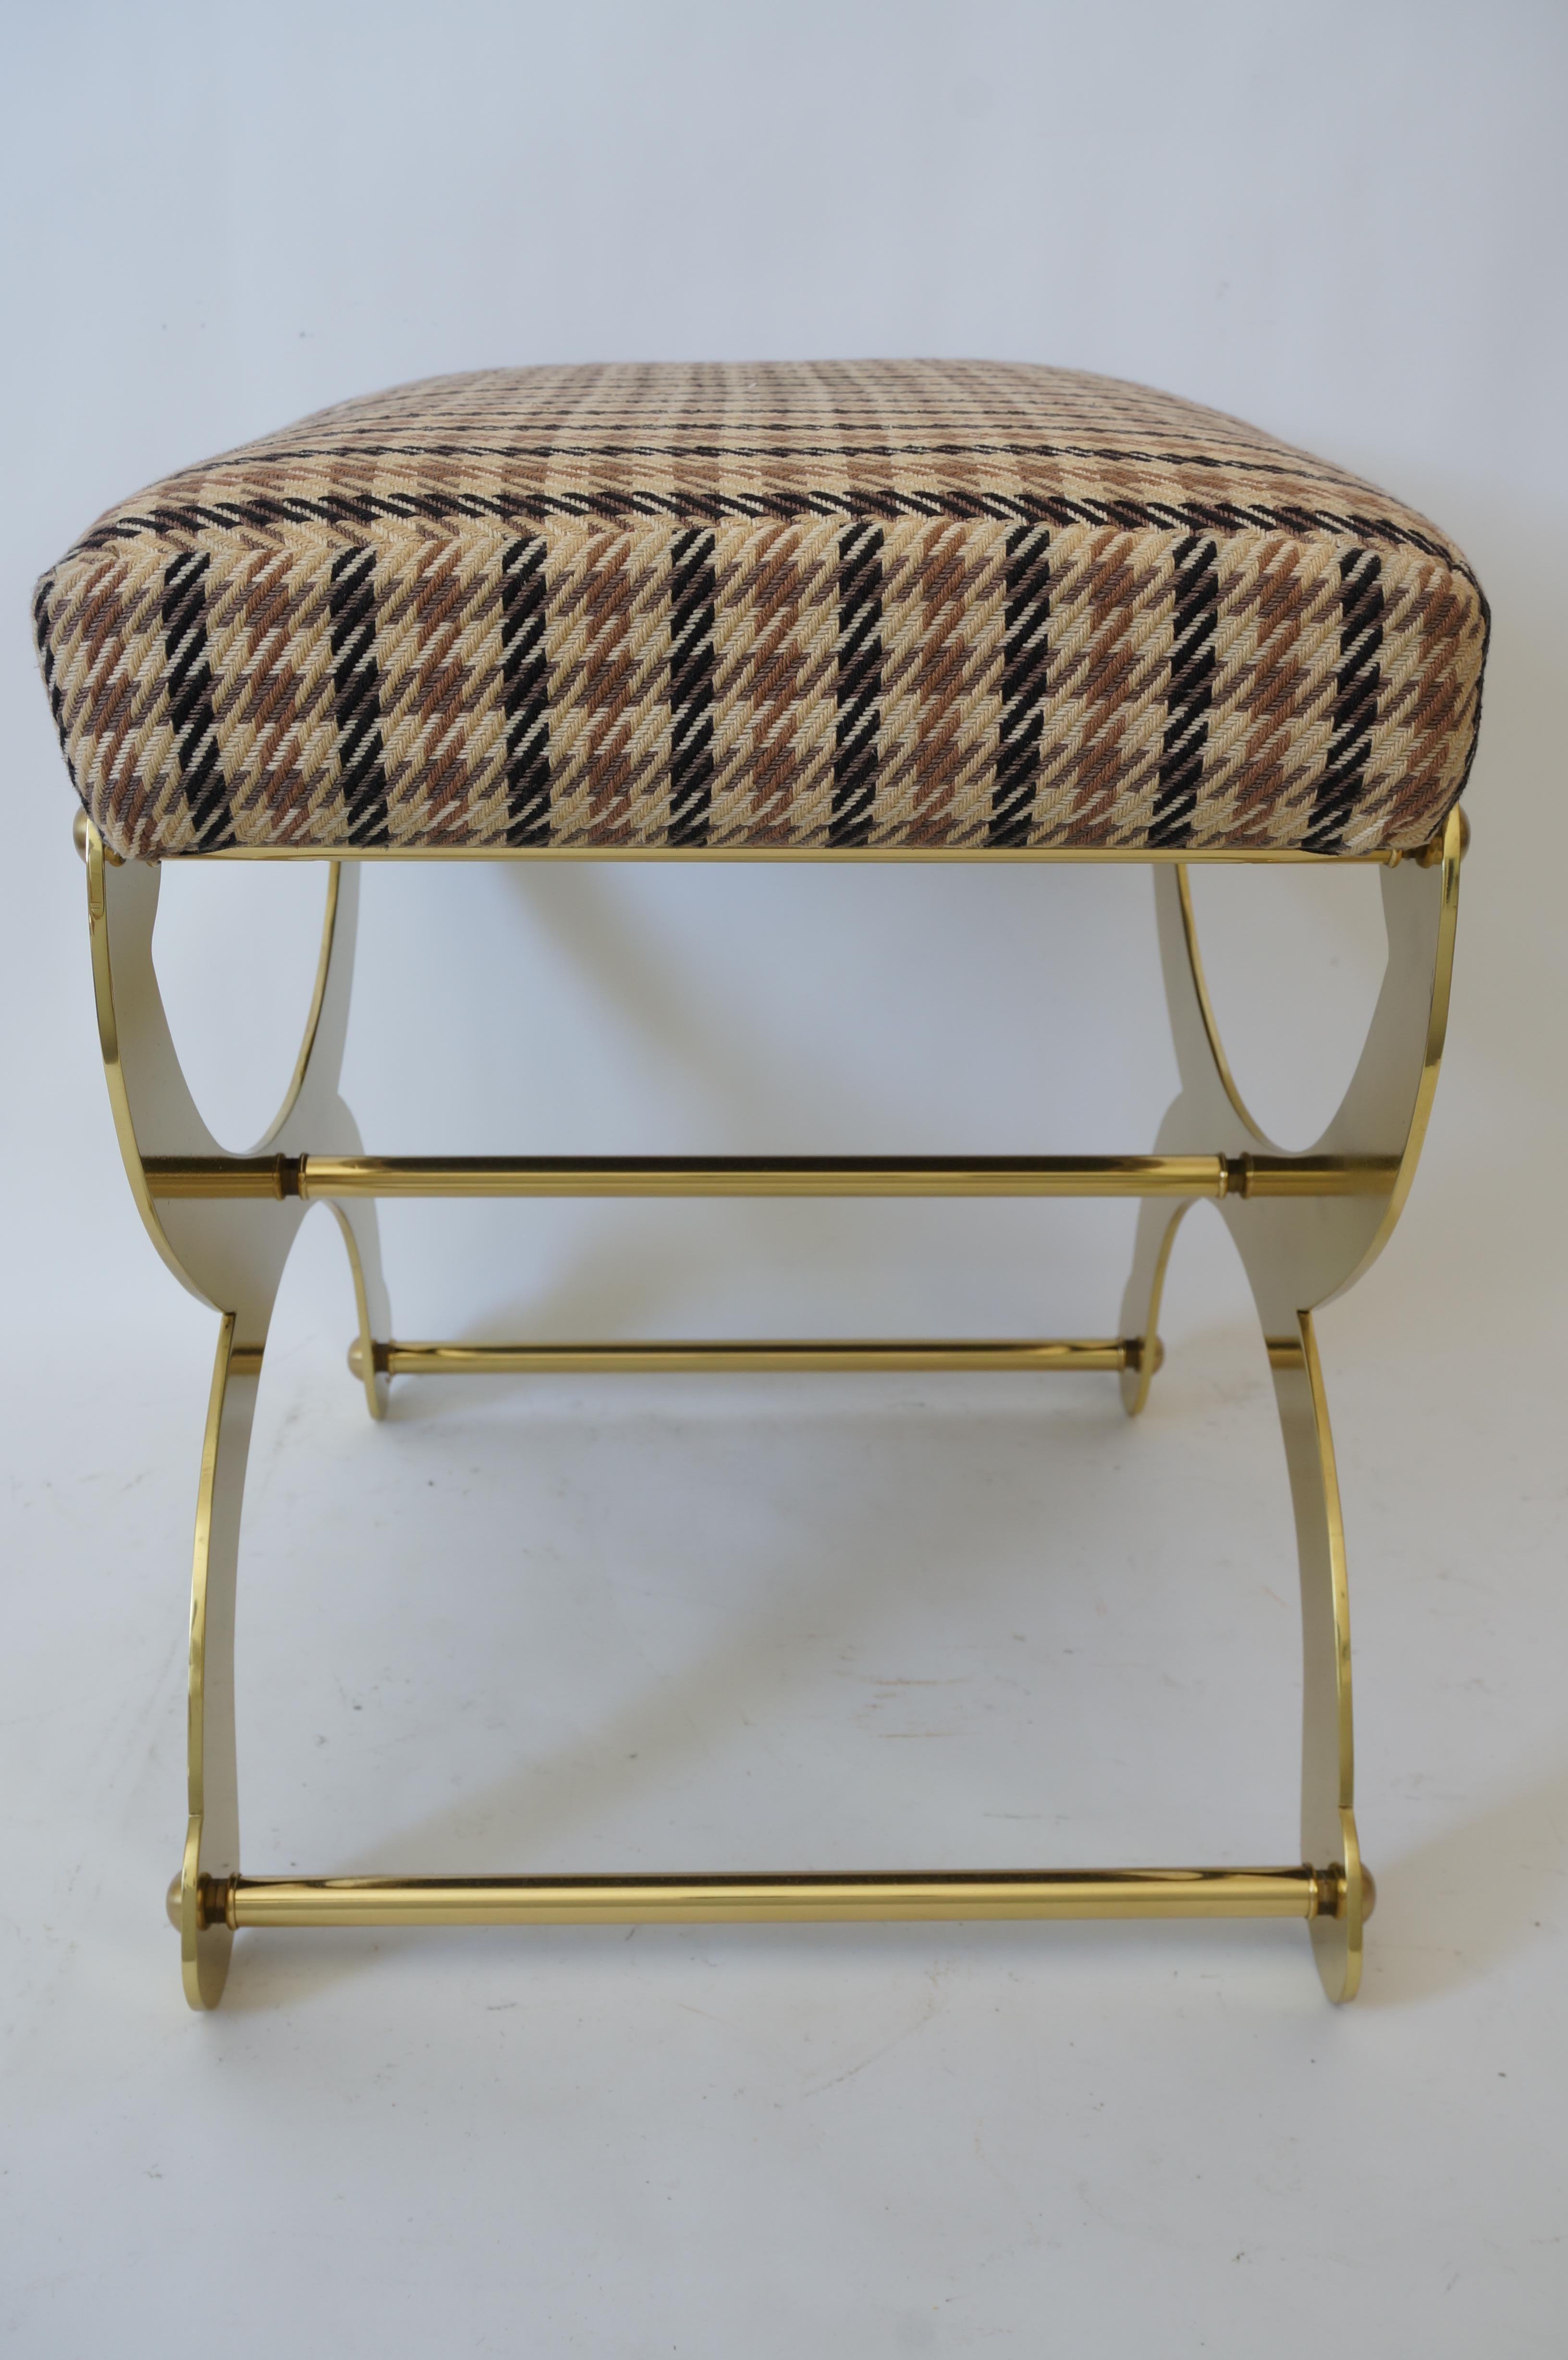 Lacquered Polished Brass Curule Bench by Maison Jansen